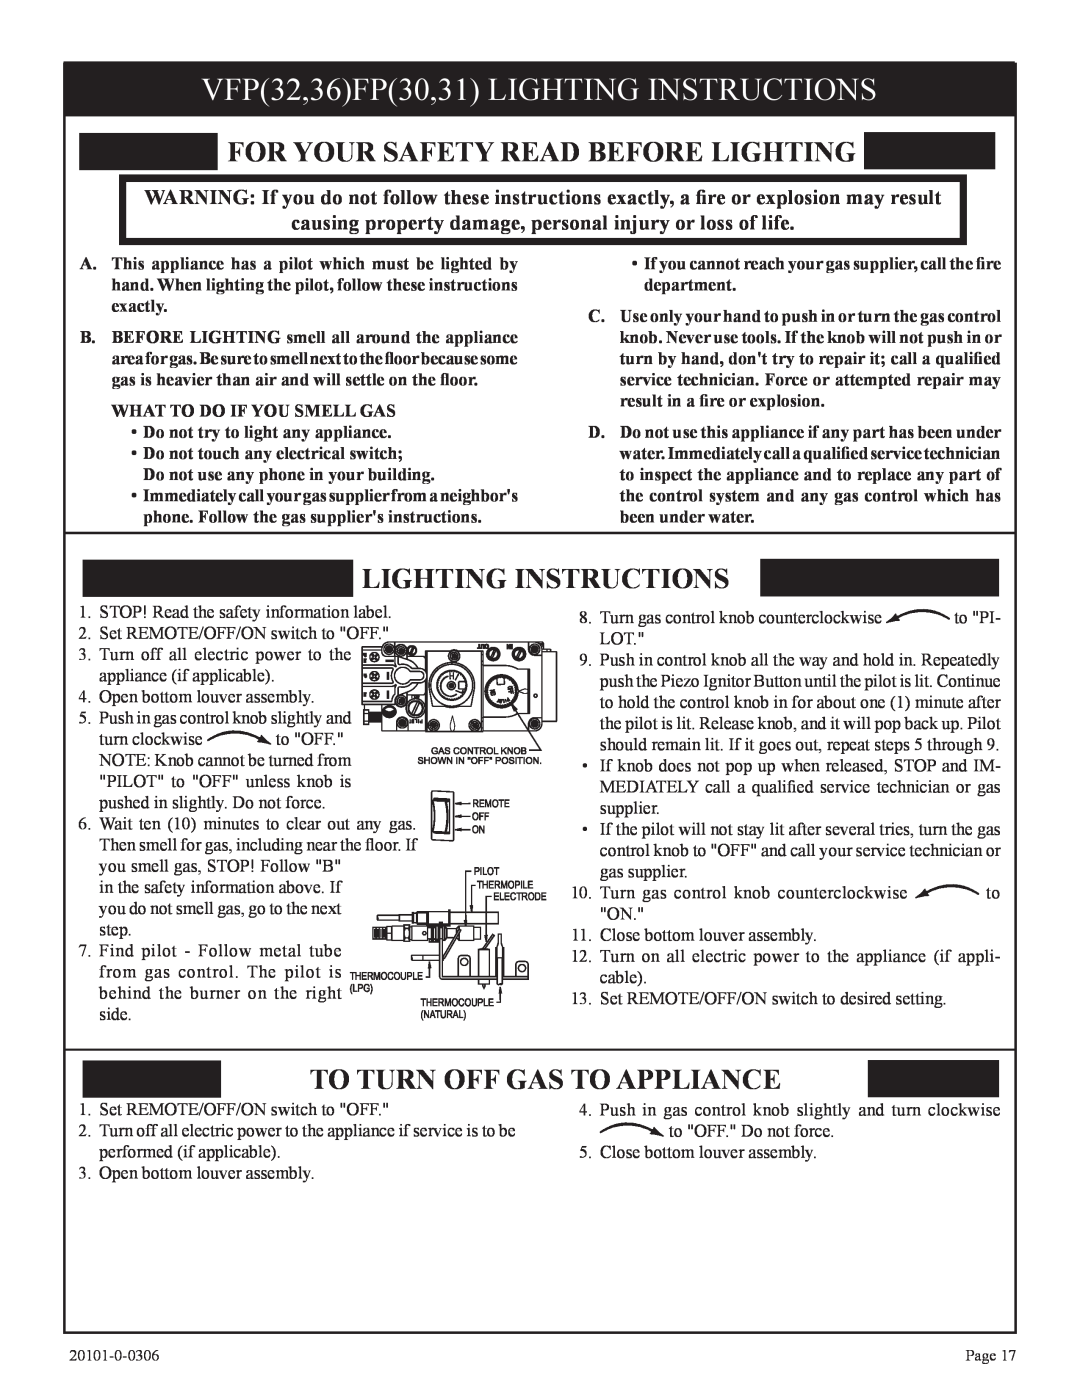 Empire Comfort Systems 31)L(N, VFP36FP, VFP32FP VFP32,36FP30,31 LIGHTING INSTRUCTIONS, For Your Safety Read Before Lighting 